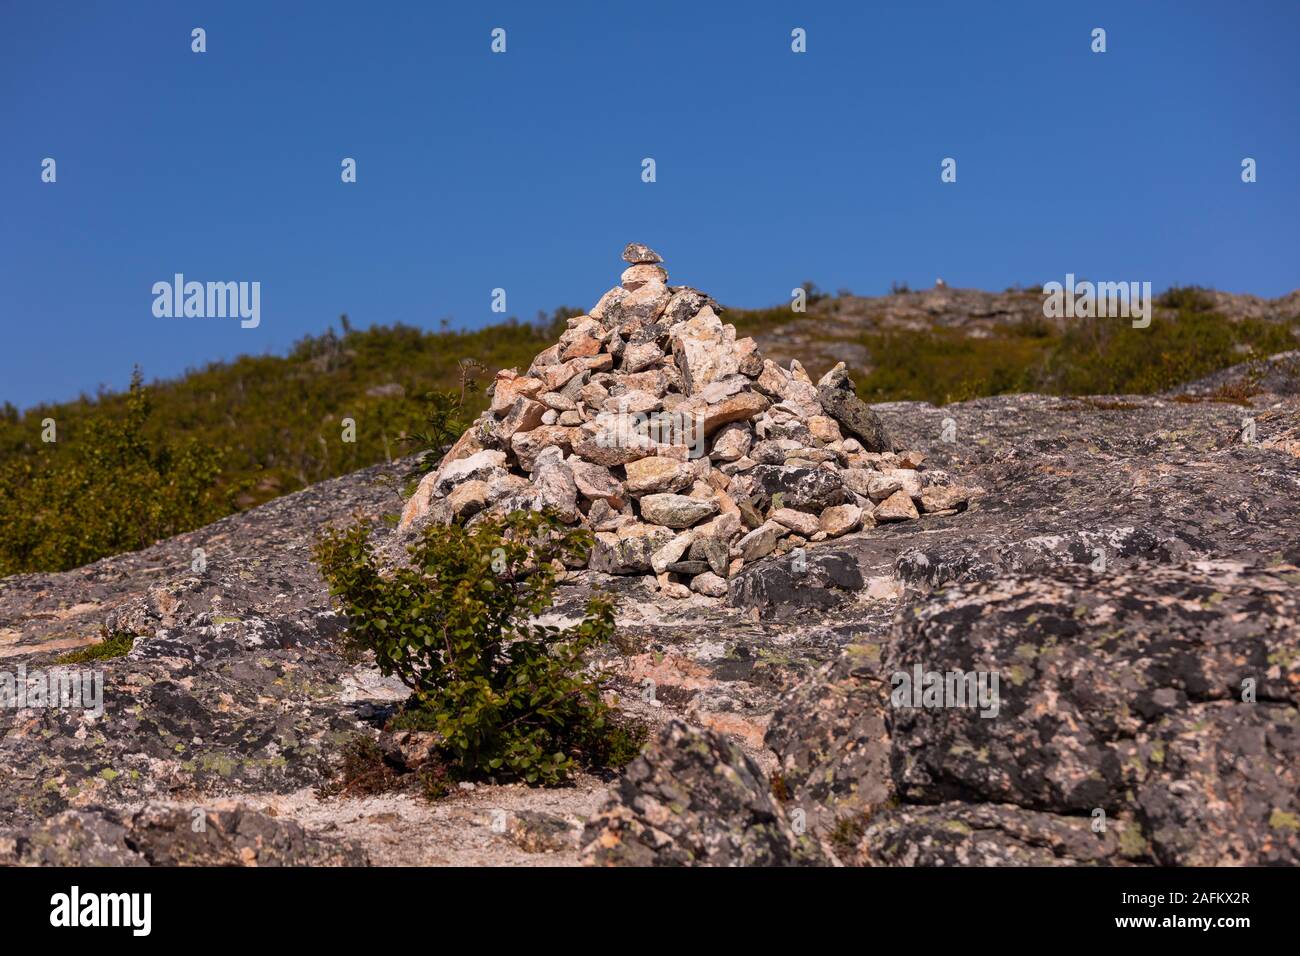 SOMMARØY, TROMS COUNTY, NORWAY - Rock cairn on trail in northern Norway. Stock Photo